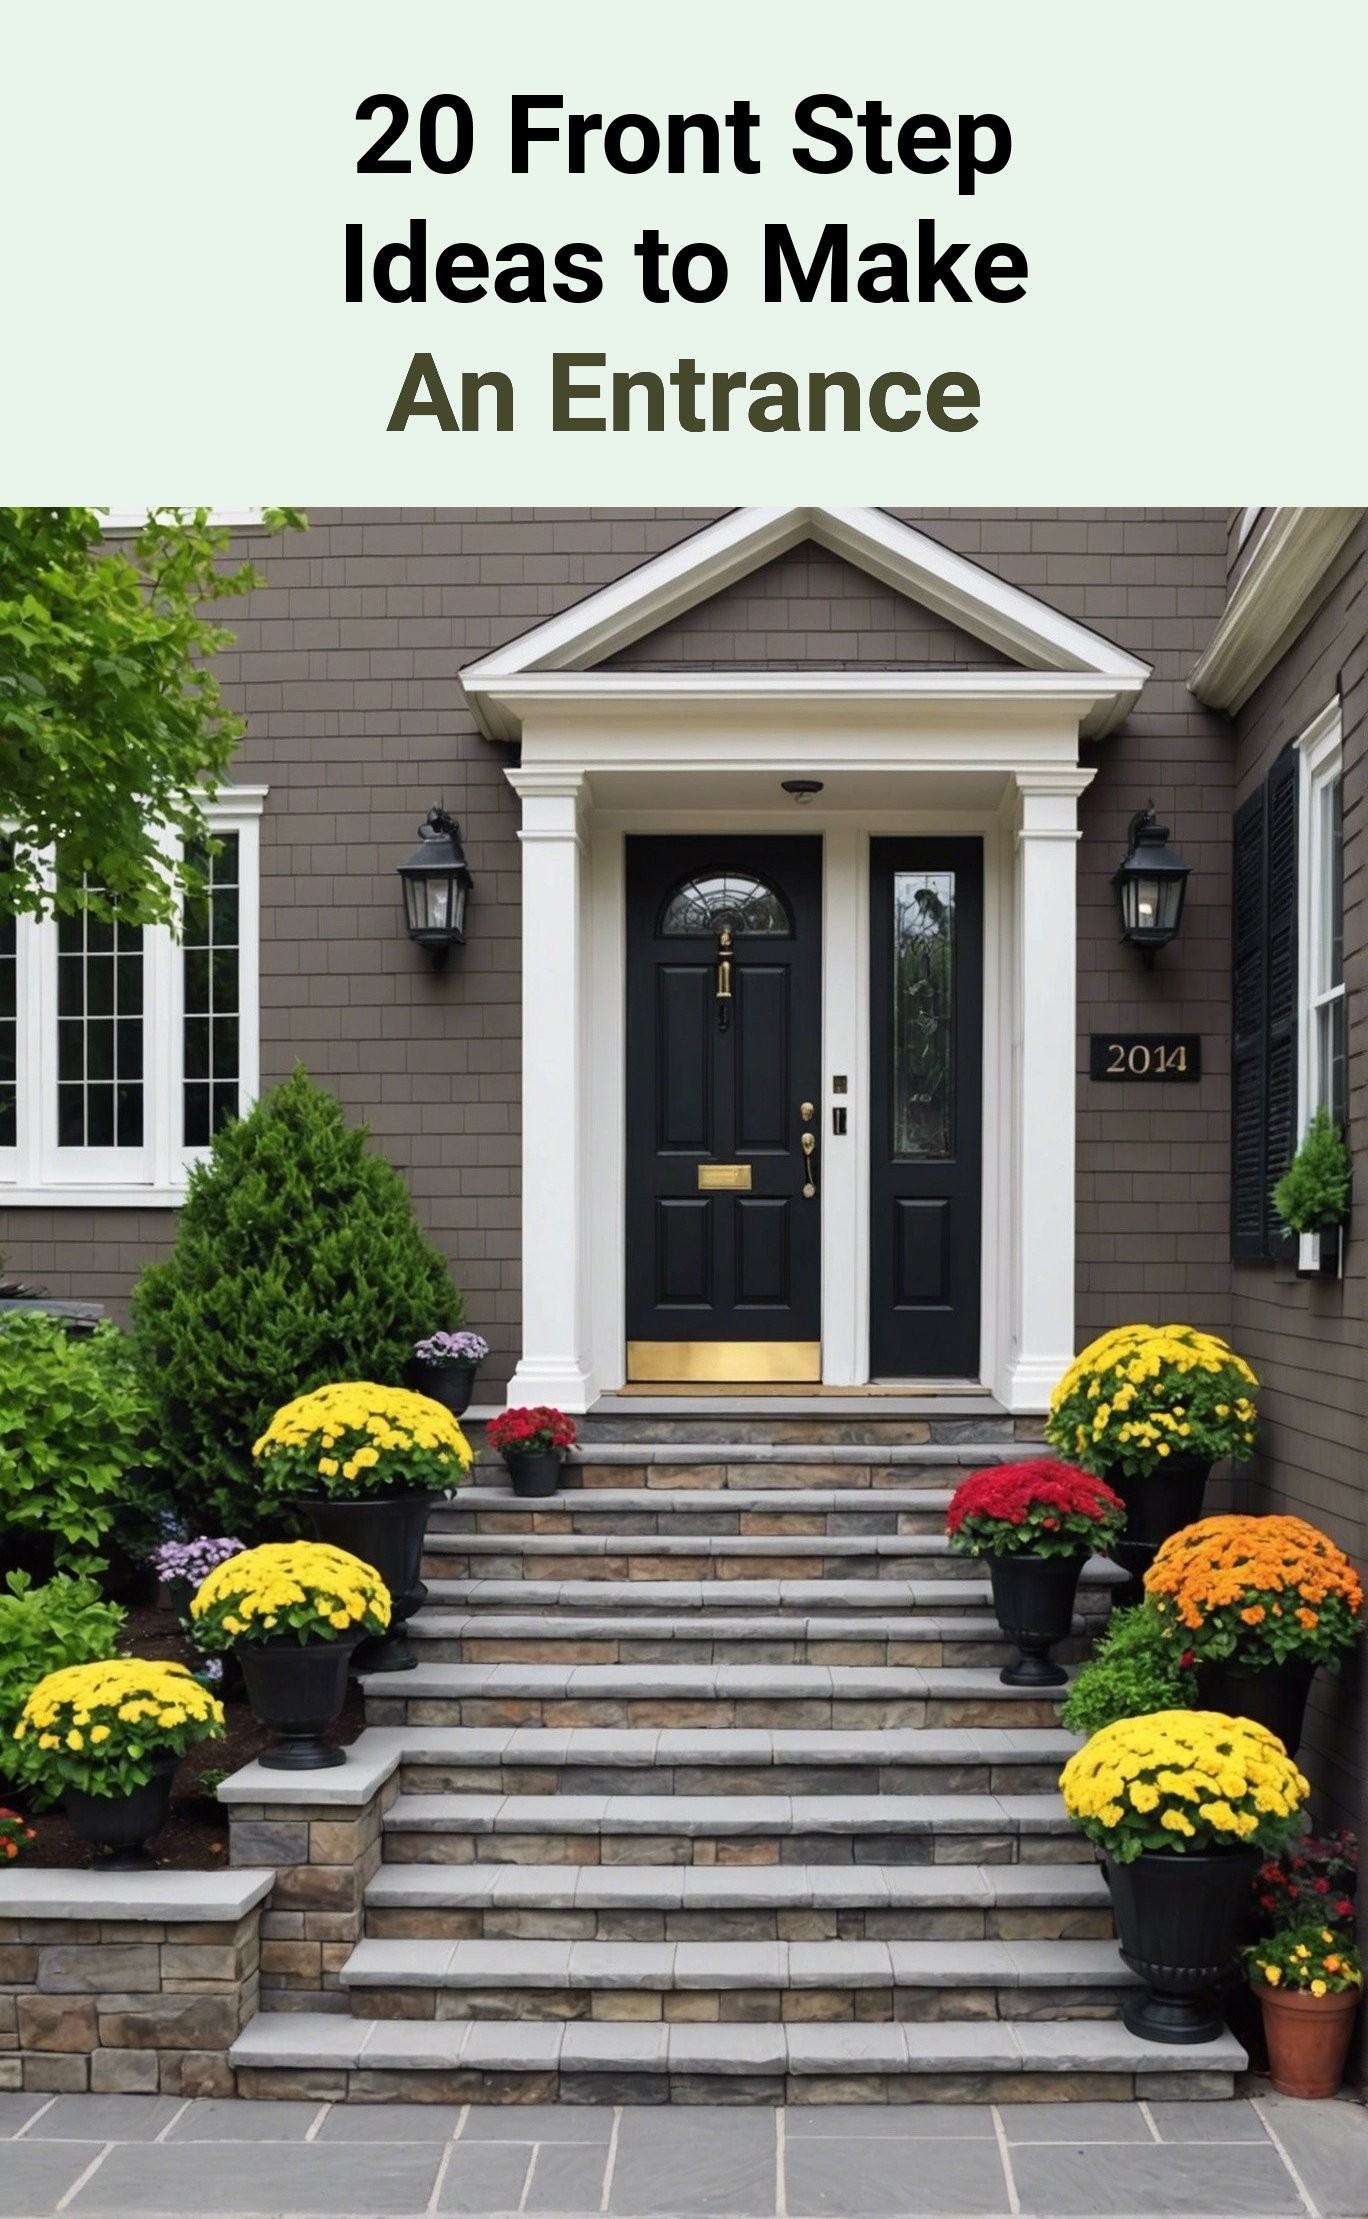 20 Front Step Ideas to Make An Entrance